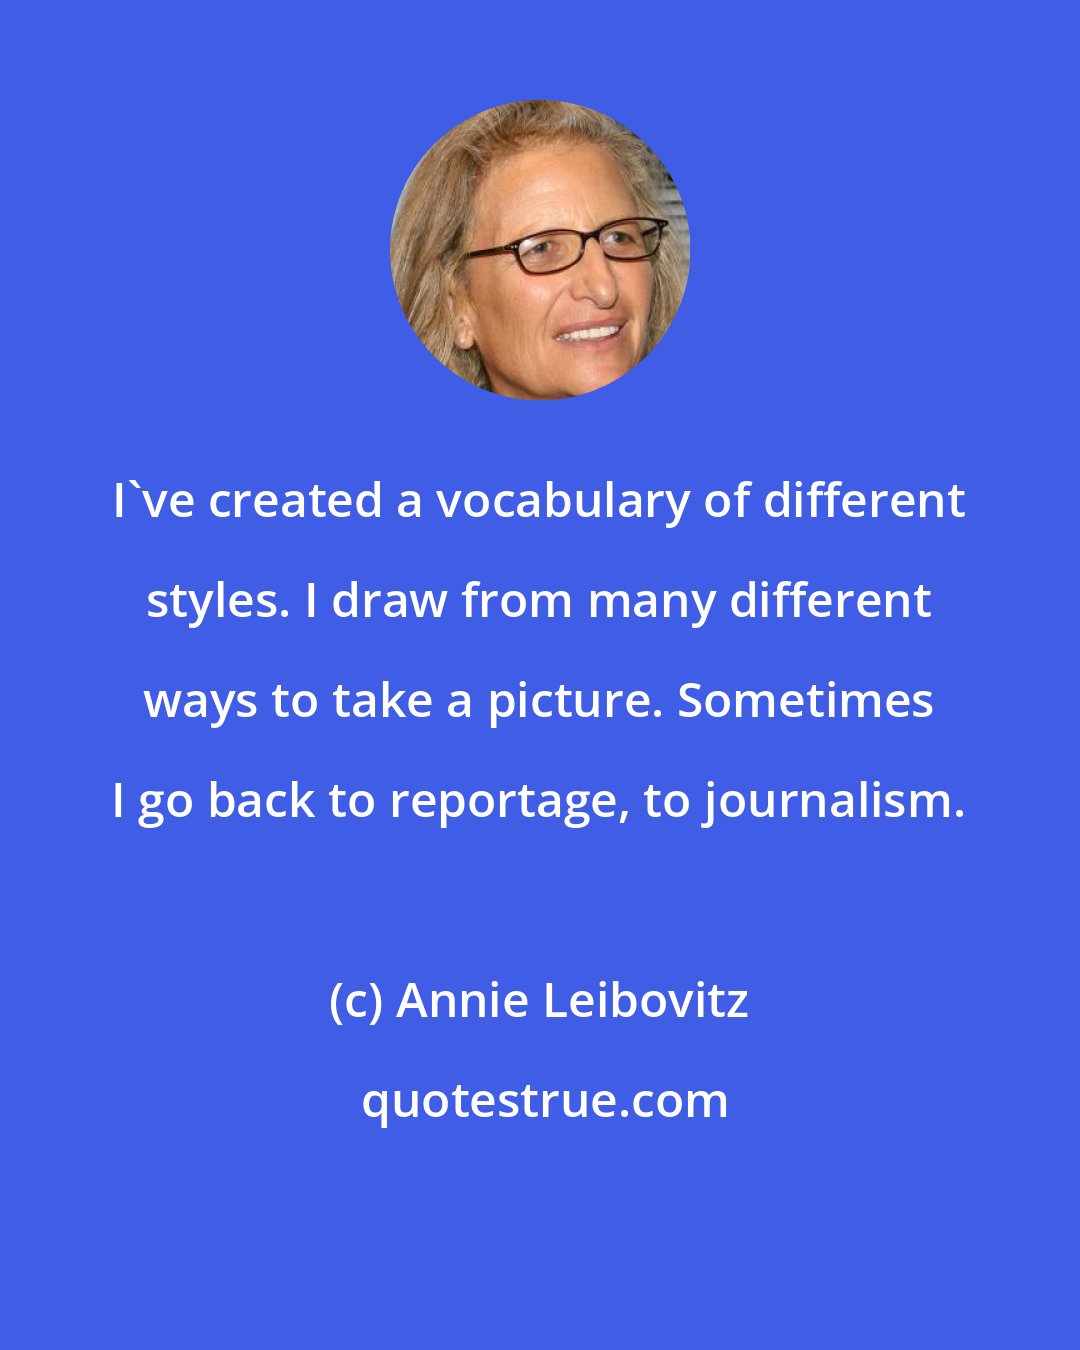 Annie Leibovitz: I've created a vocabulary of different styles. I draw from many different ways to take a picture. Sometimes I go back to reportage, to journalism.